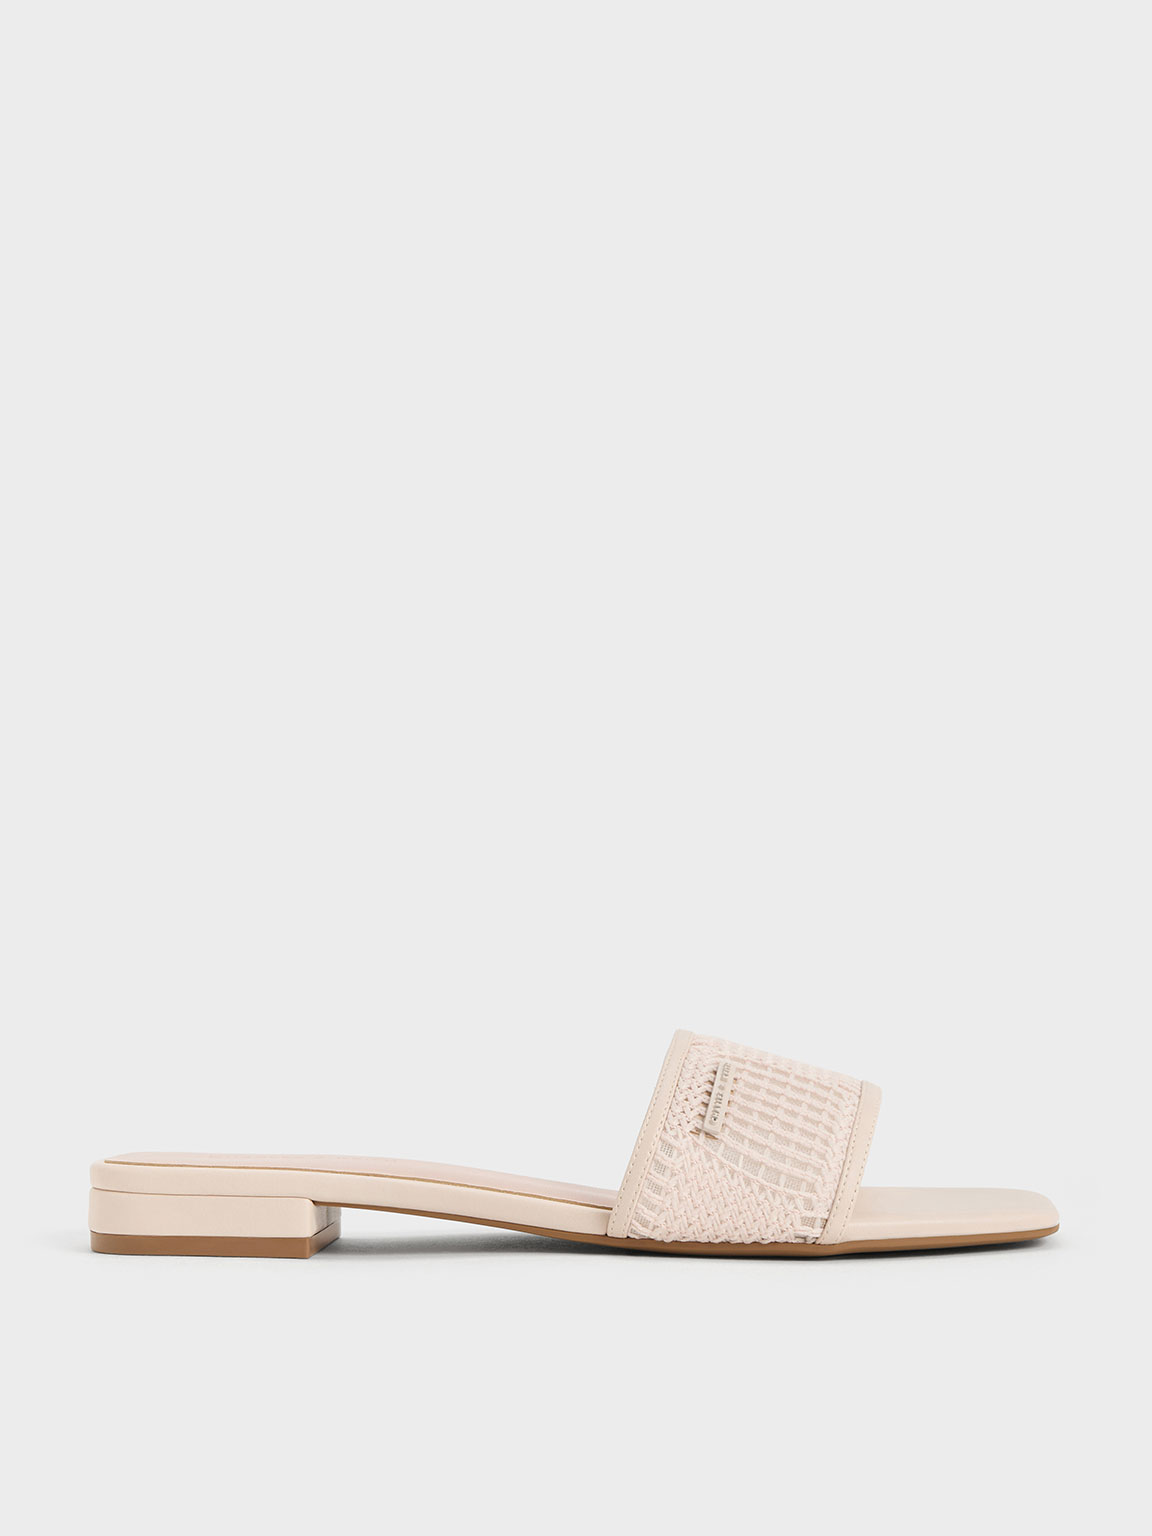 Charles & Keith Mesh Woven Slide Sandals In Cream